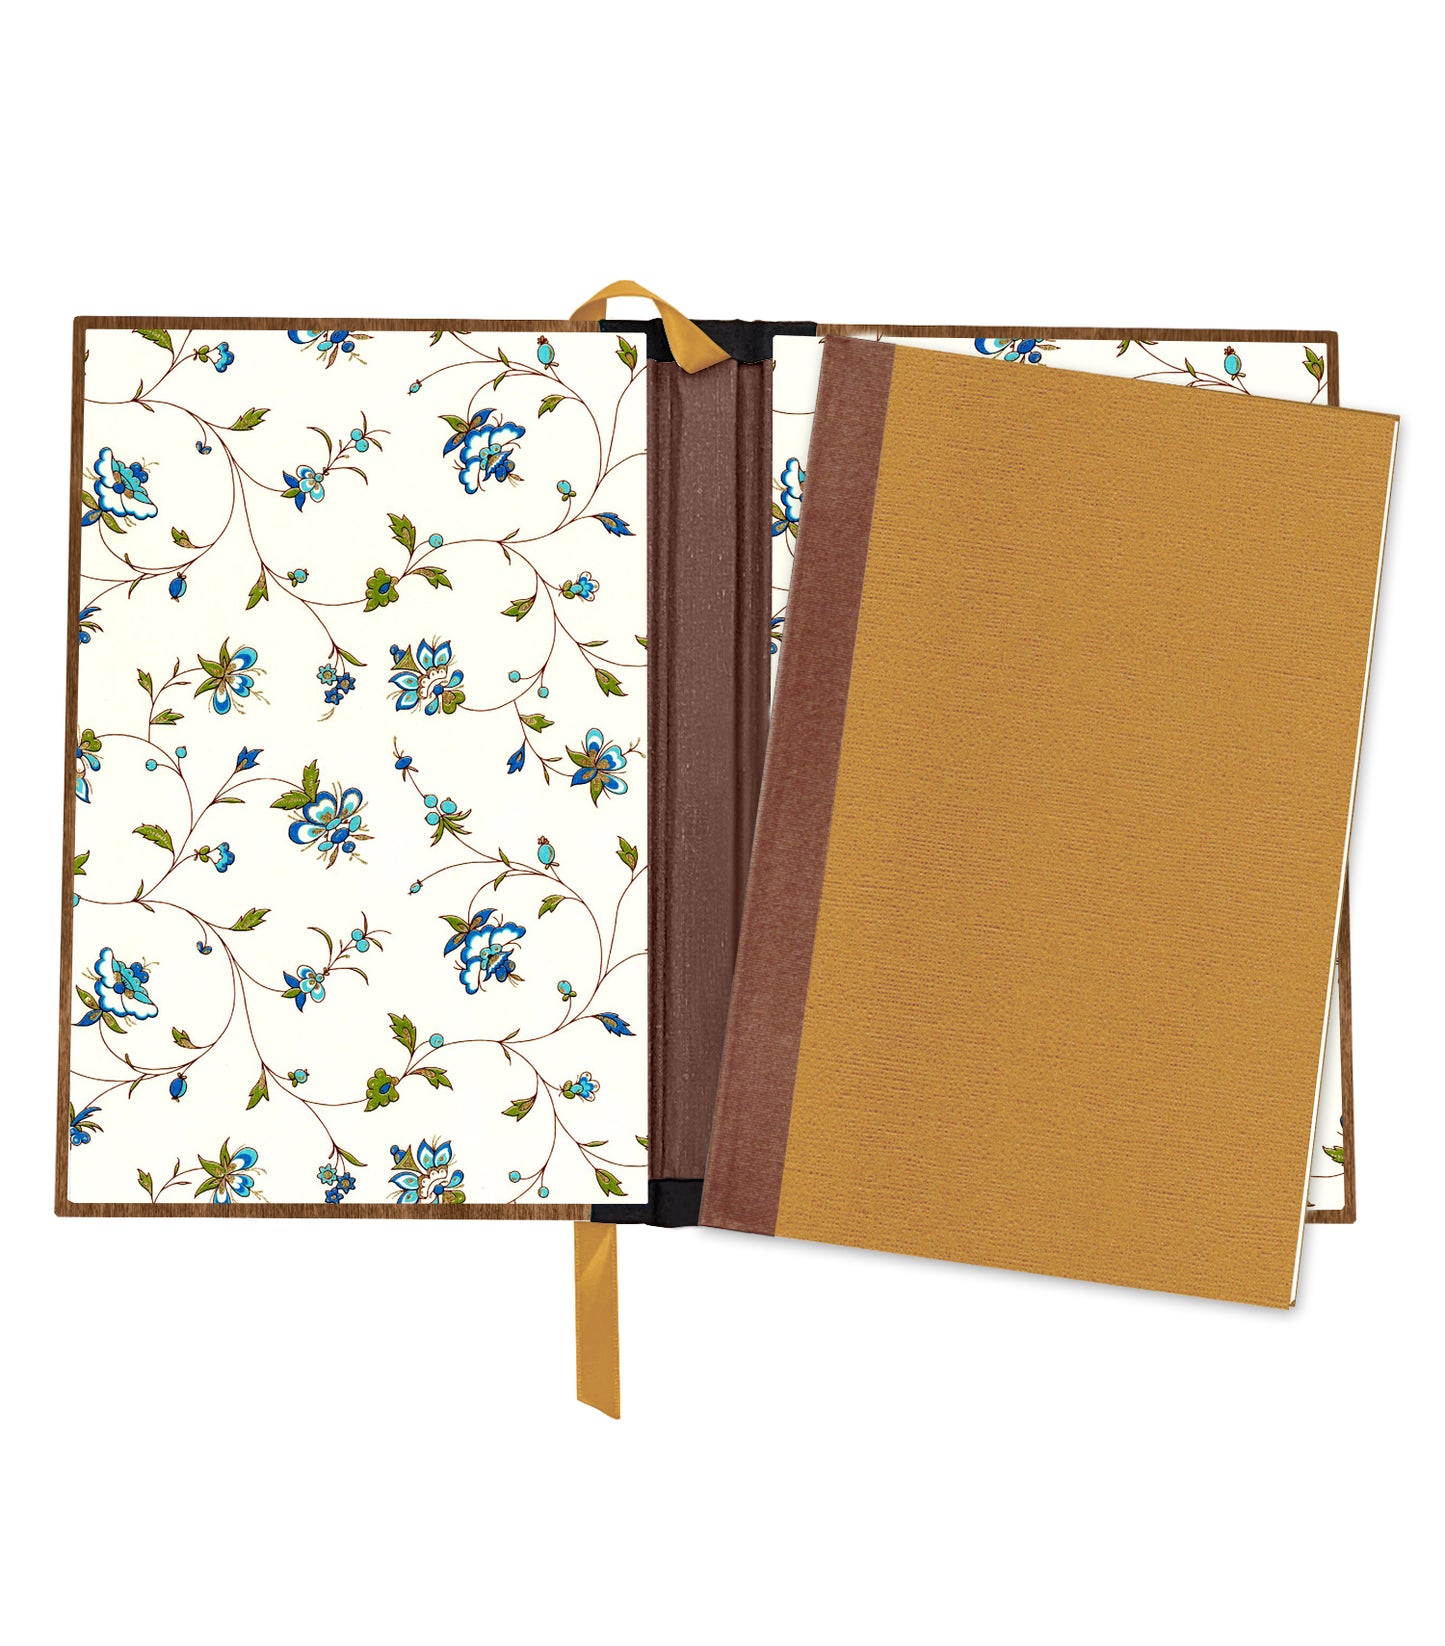 Enchanted Key Magnetic Wooden Journal, Brown & Cream